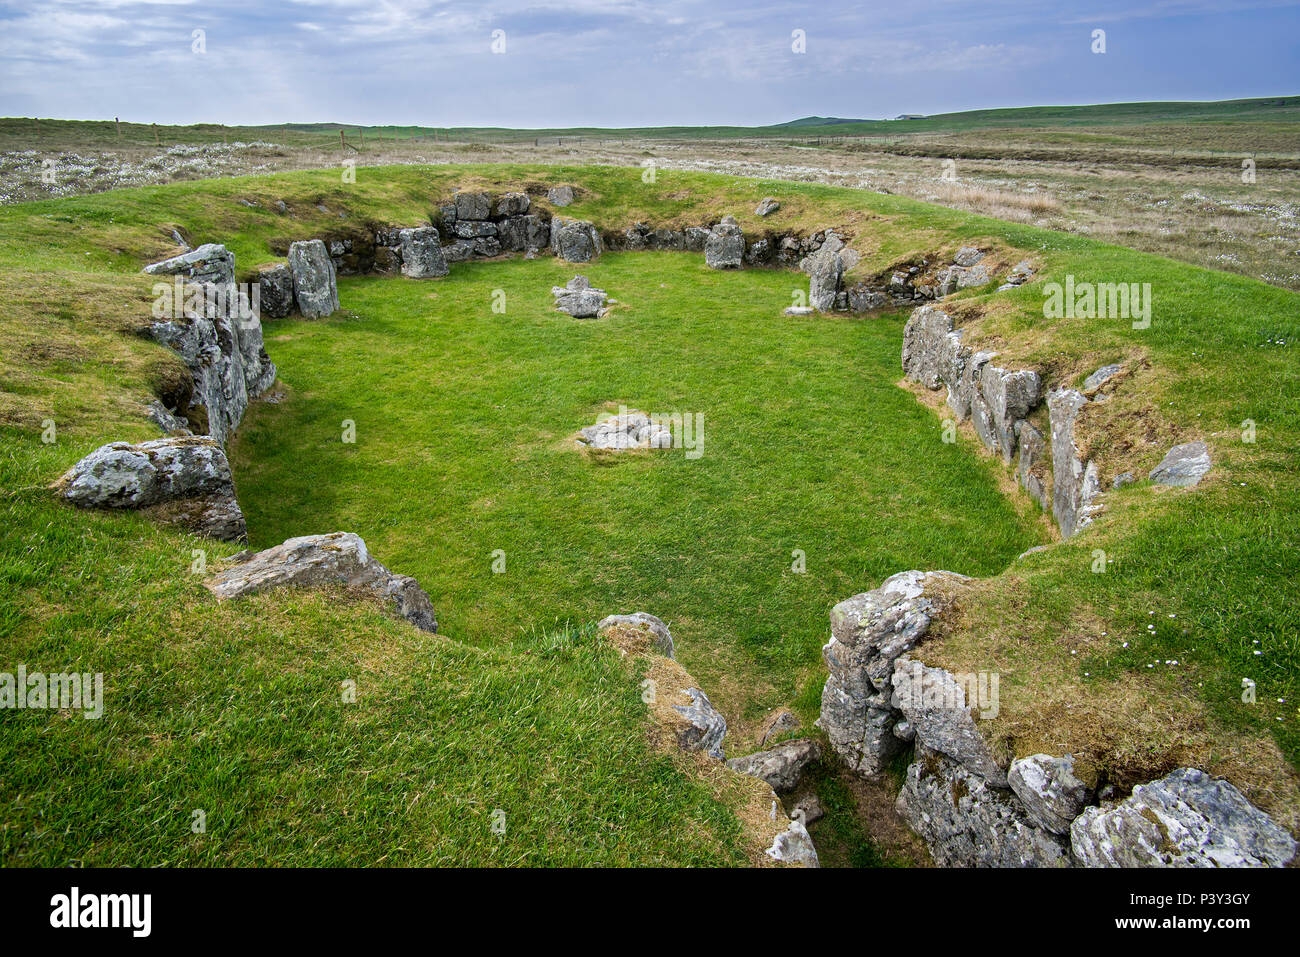 Stanydale Temple, Neolithic site on the Mainland, Shetland Islands, Scotland, UK Stock Photo